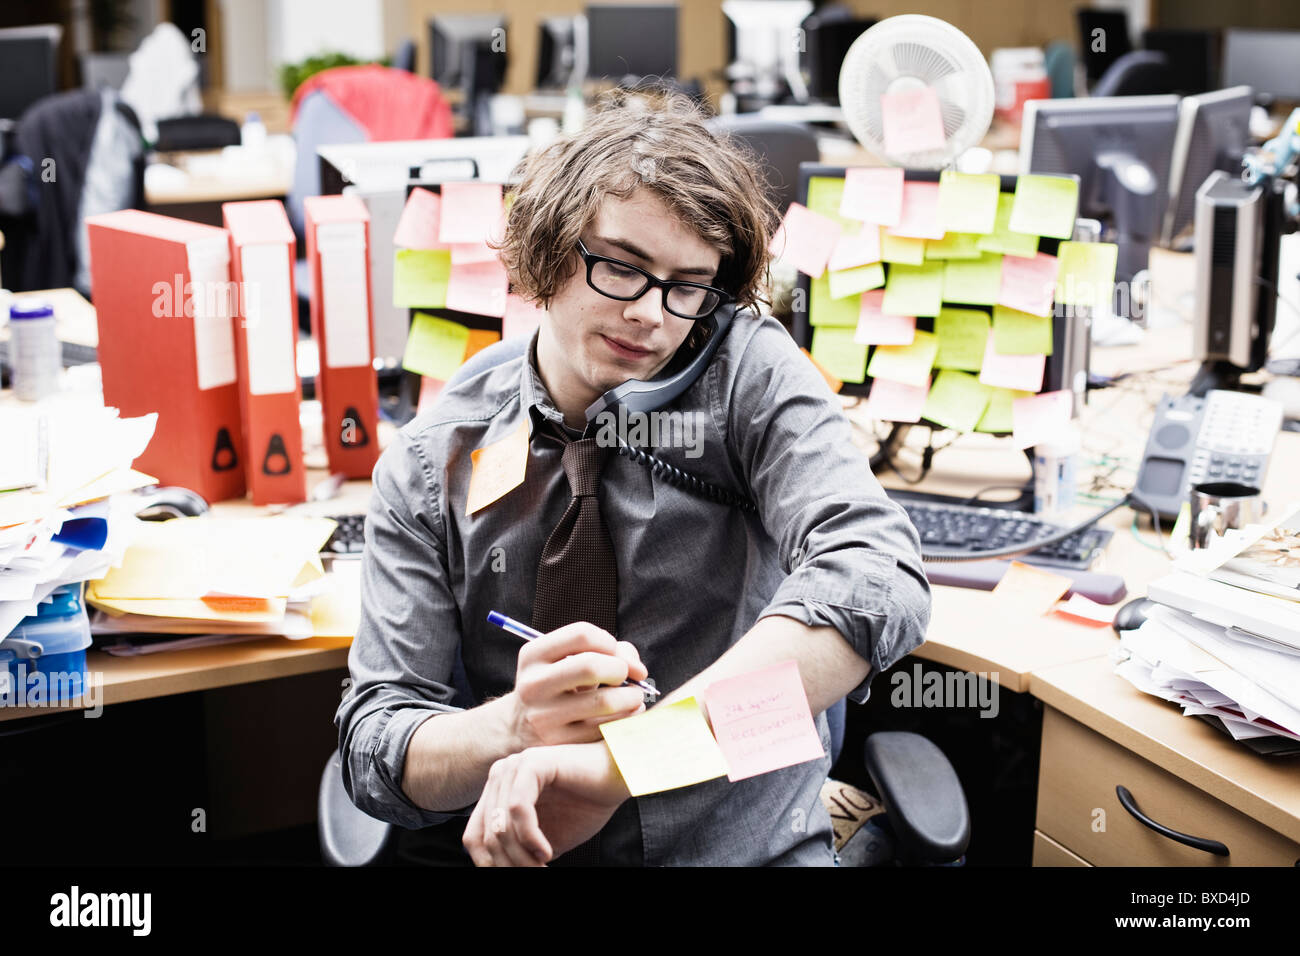 young Call center office frustration stress work Stock Photo